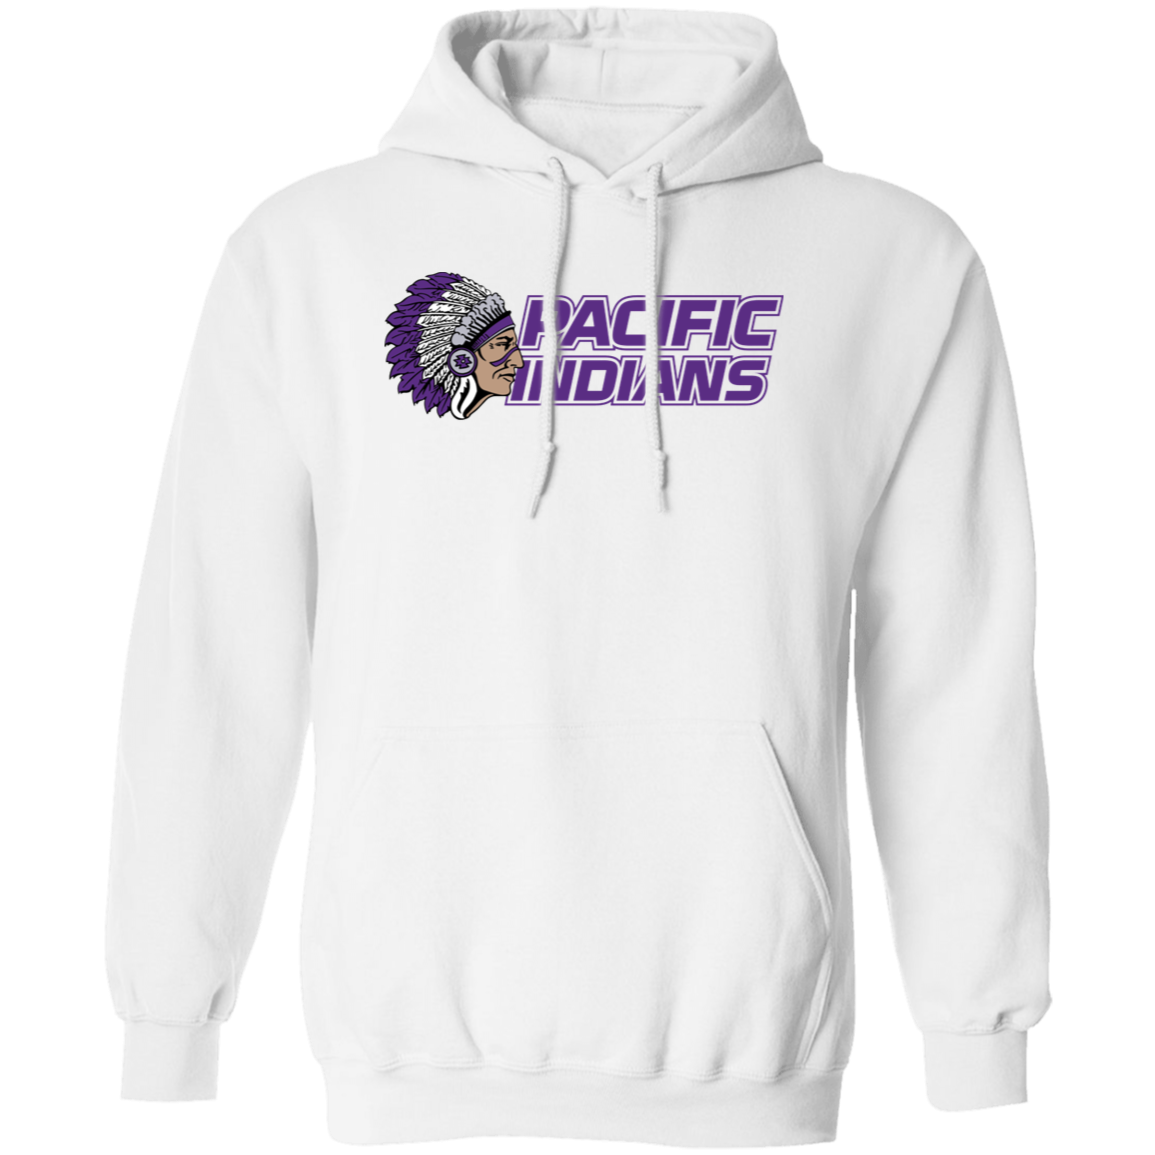 Pacific Indians Sports Club Design #2